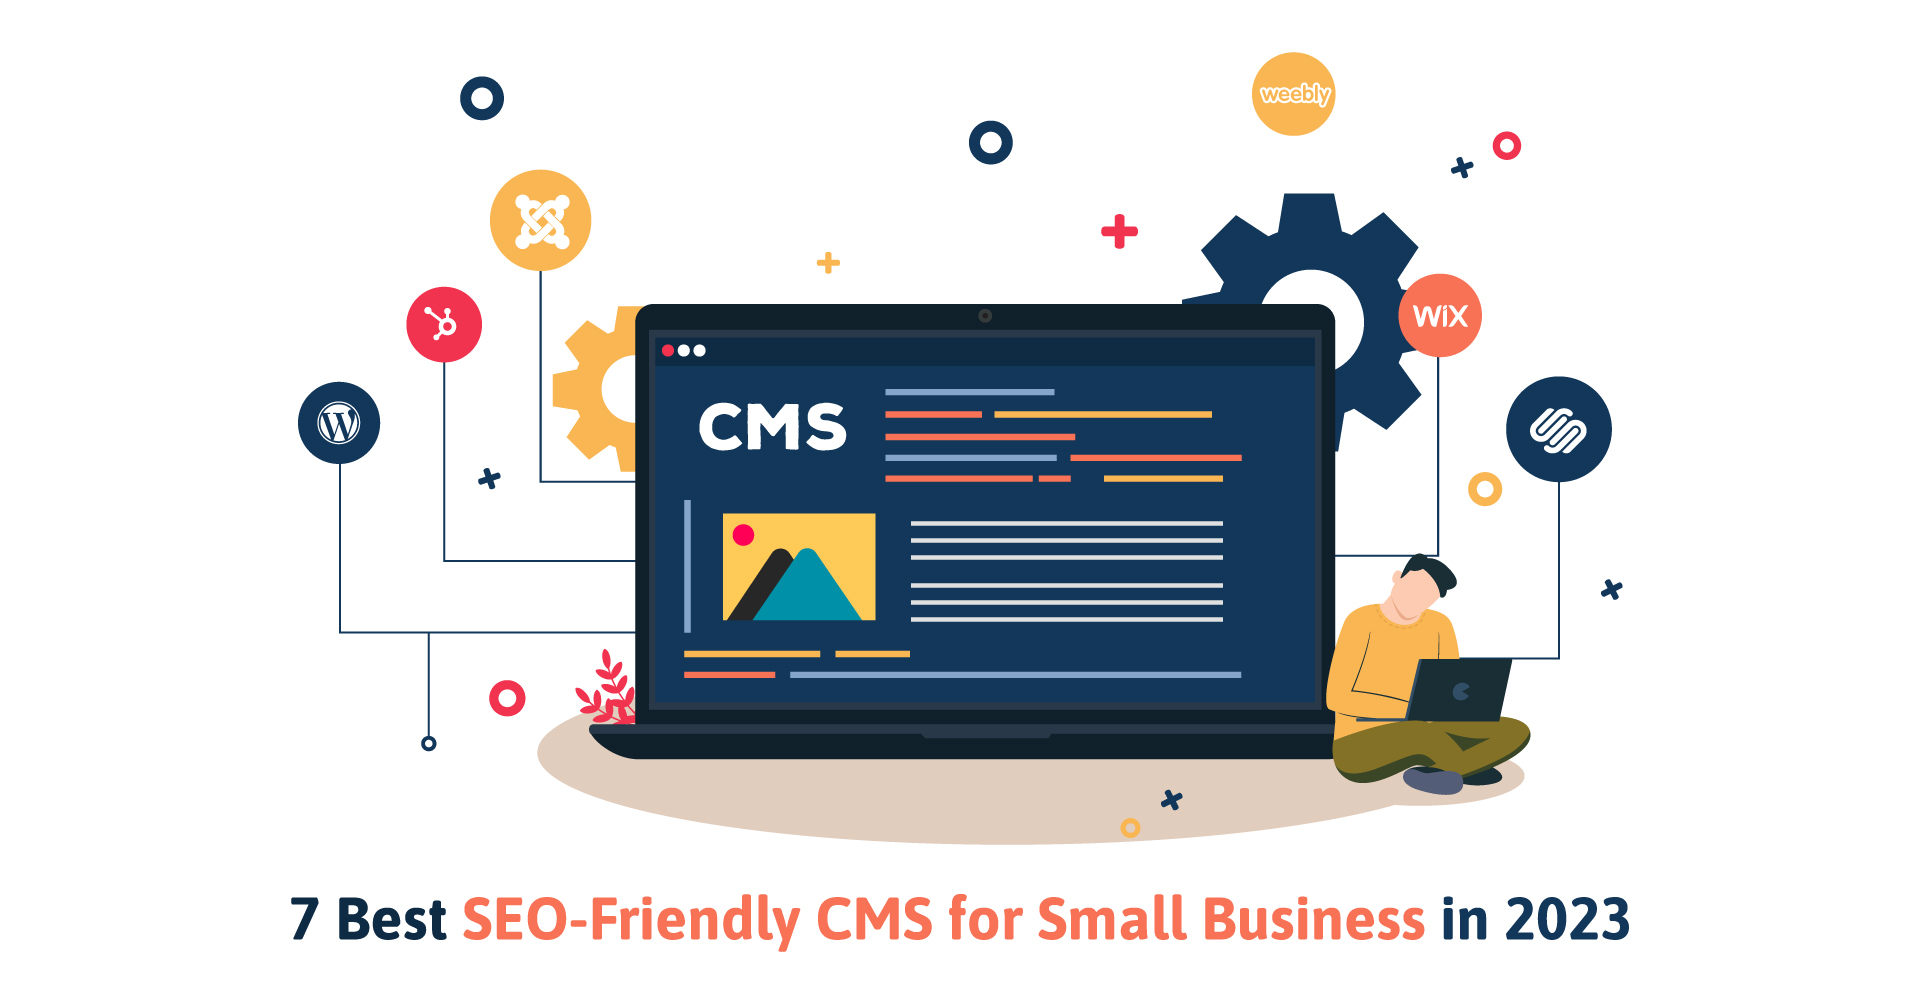 7 Best SEO-Friendly CMS for Small Business in 2023